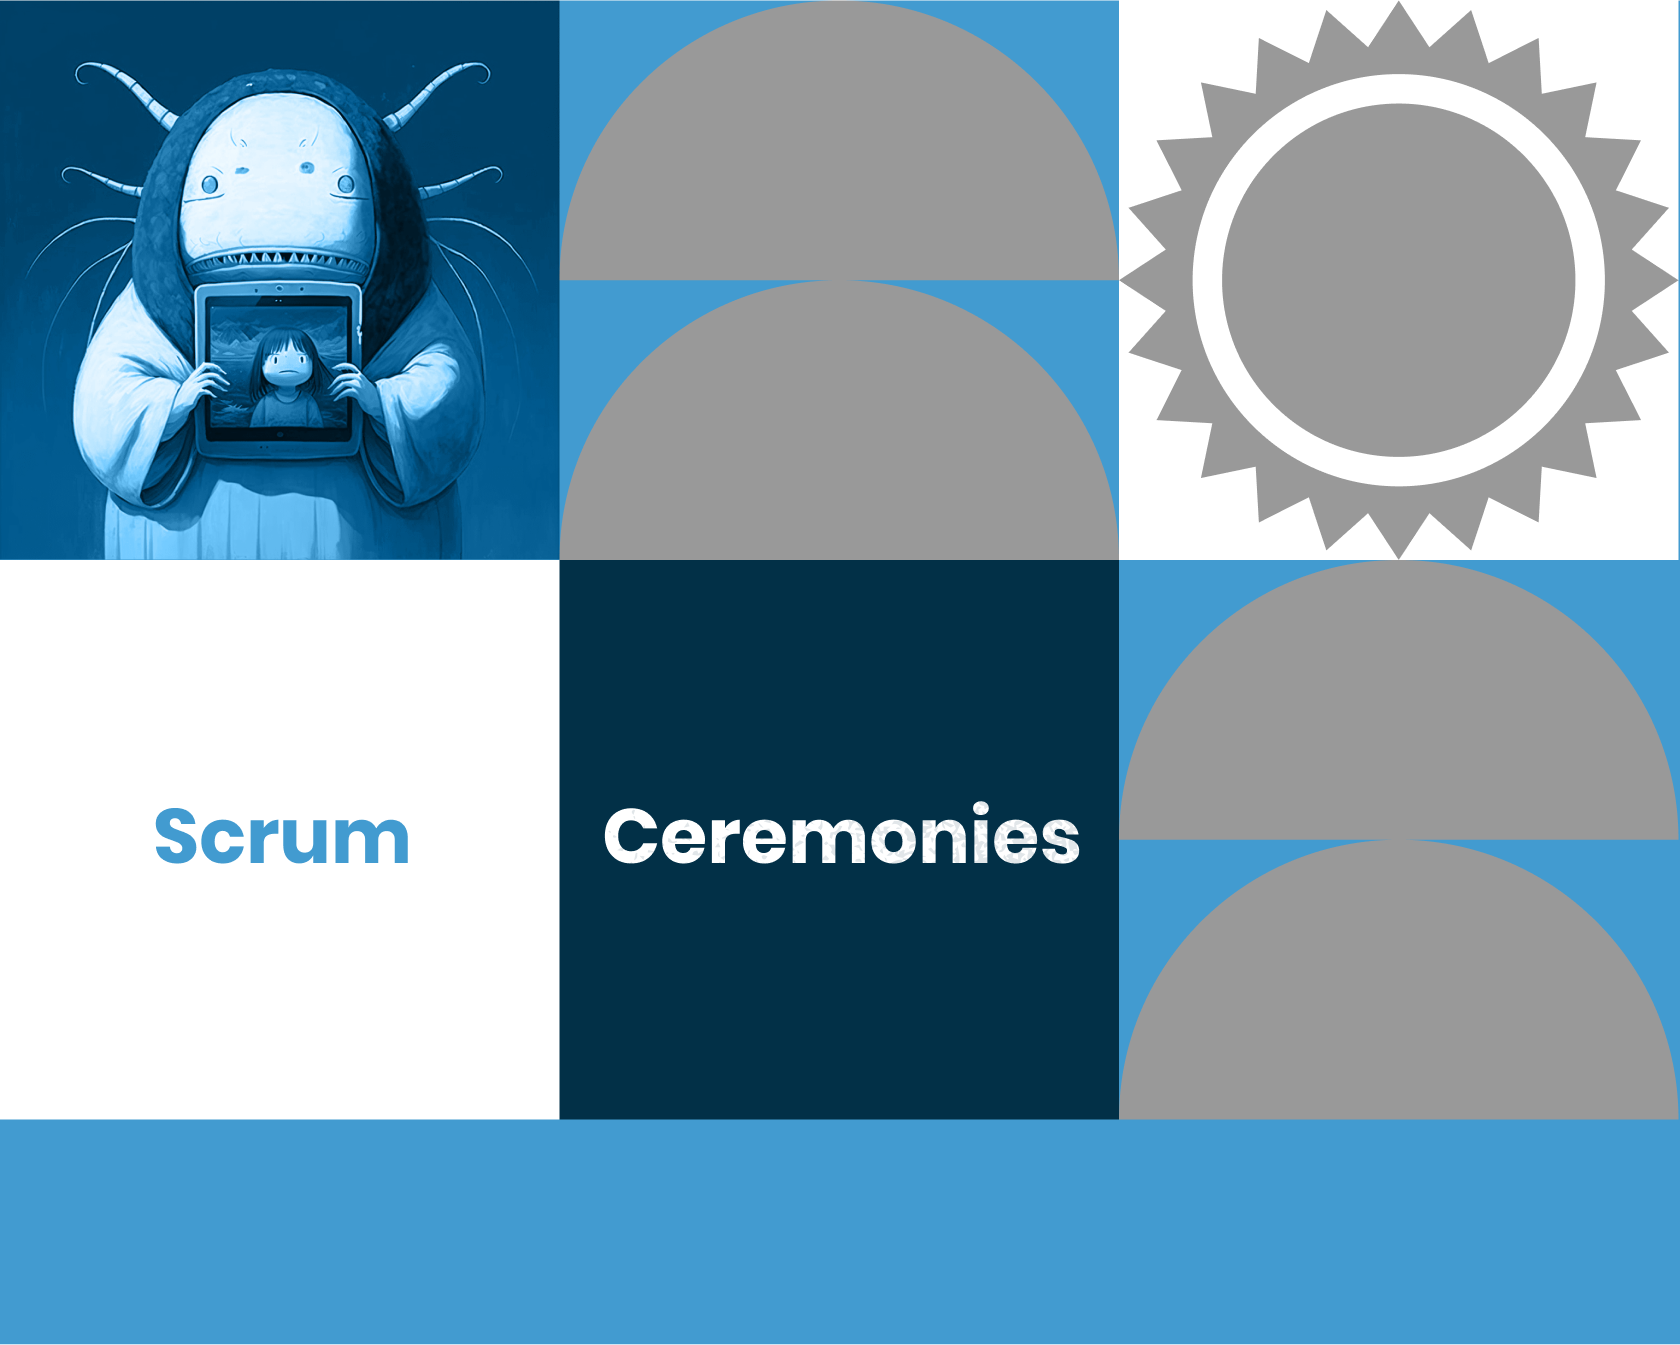 Scrum alliance logo representing the values and principles of the scrum framework